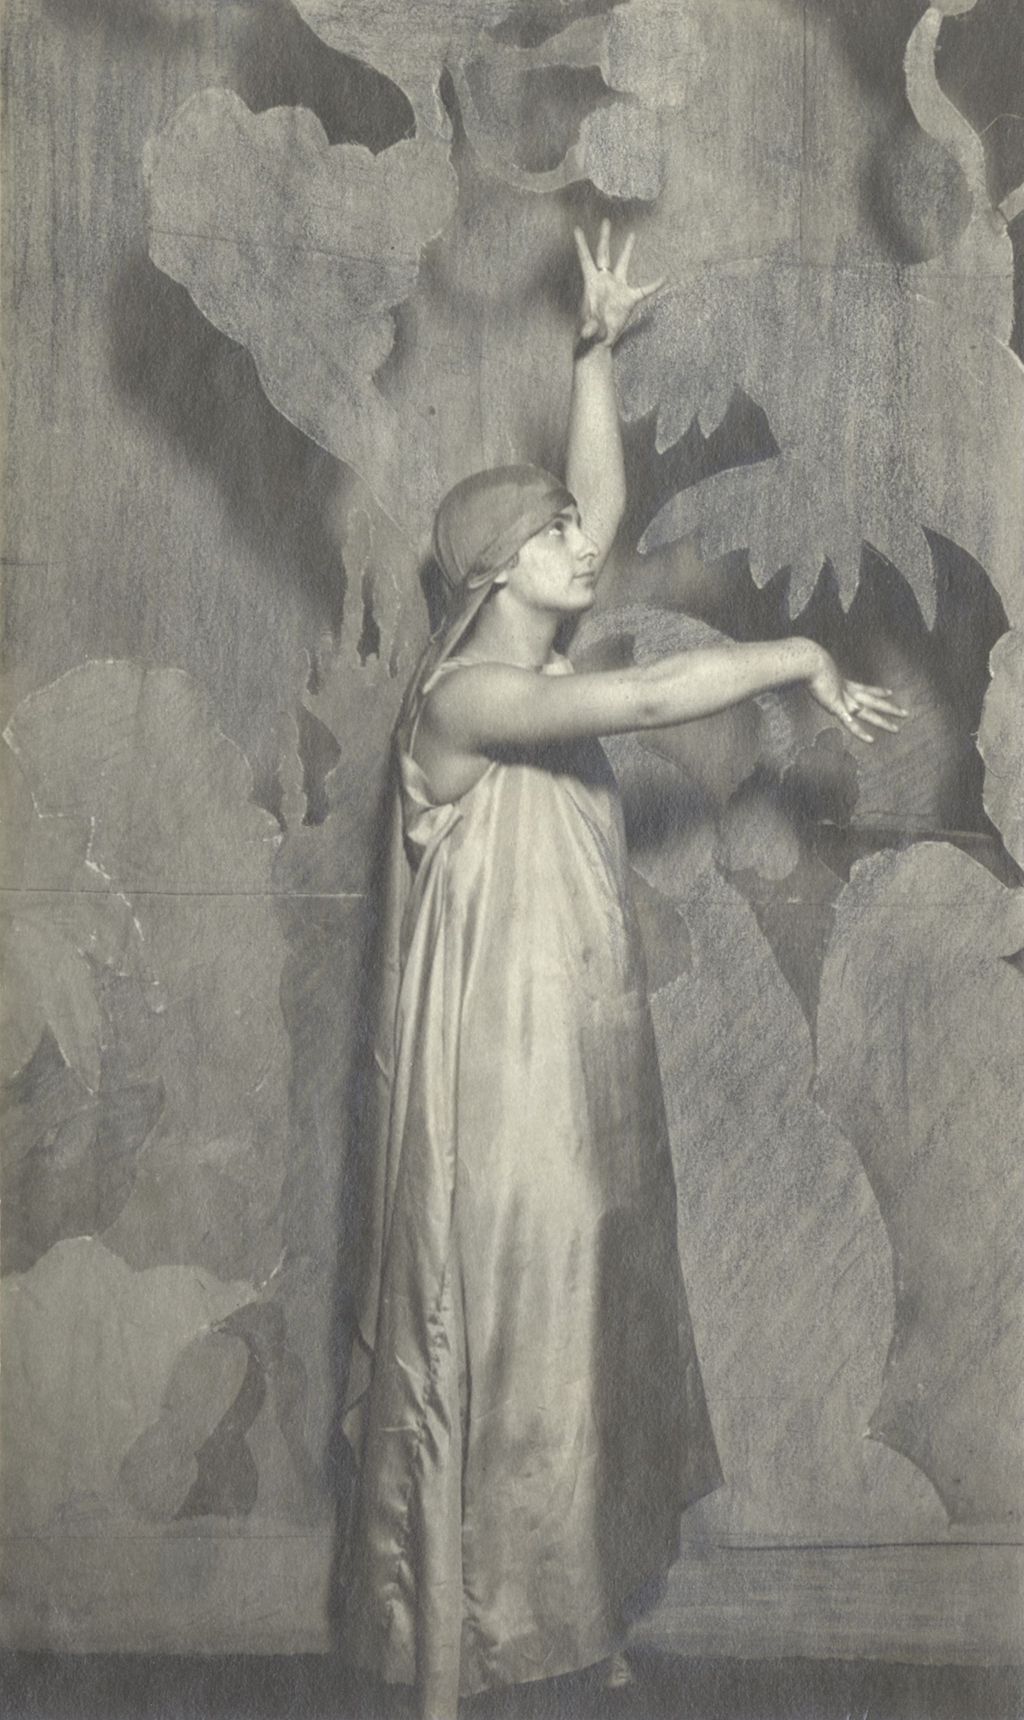 Miniature of The White Witch from Hull-House production of "The Merman's Bride"